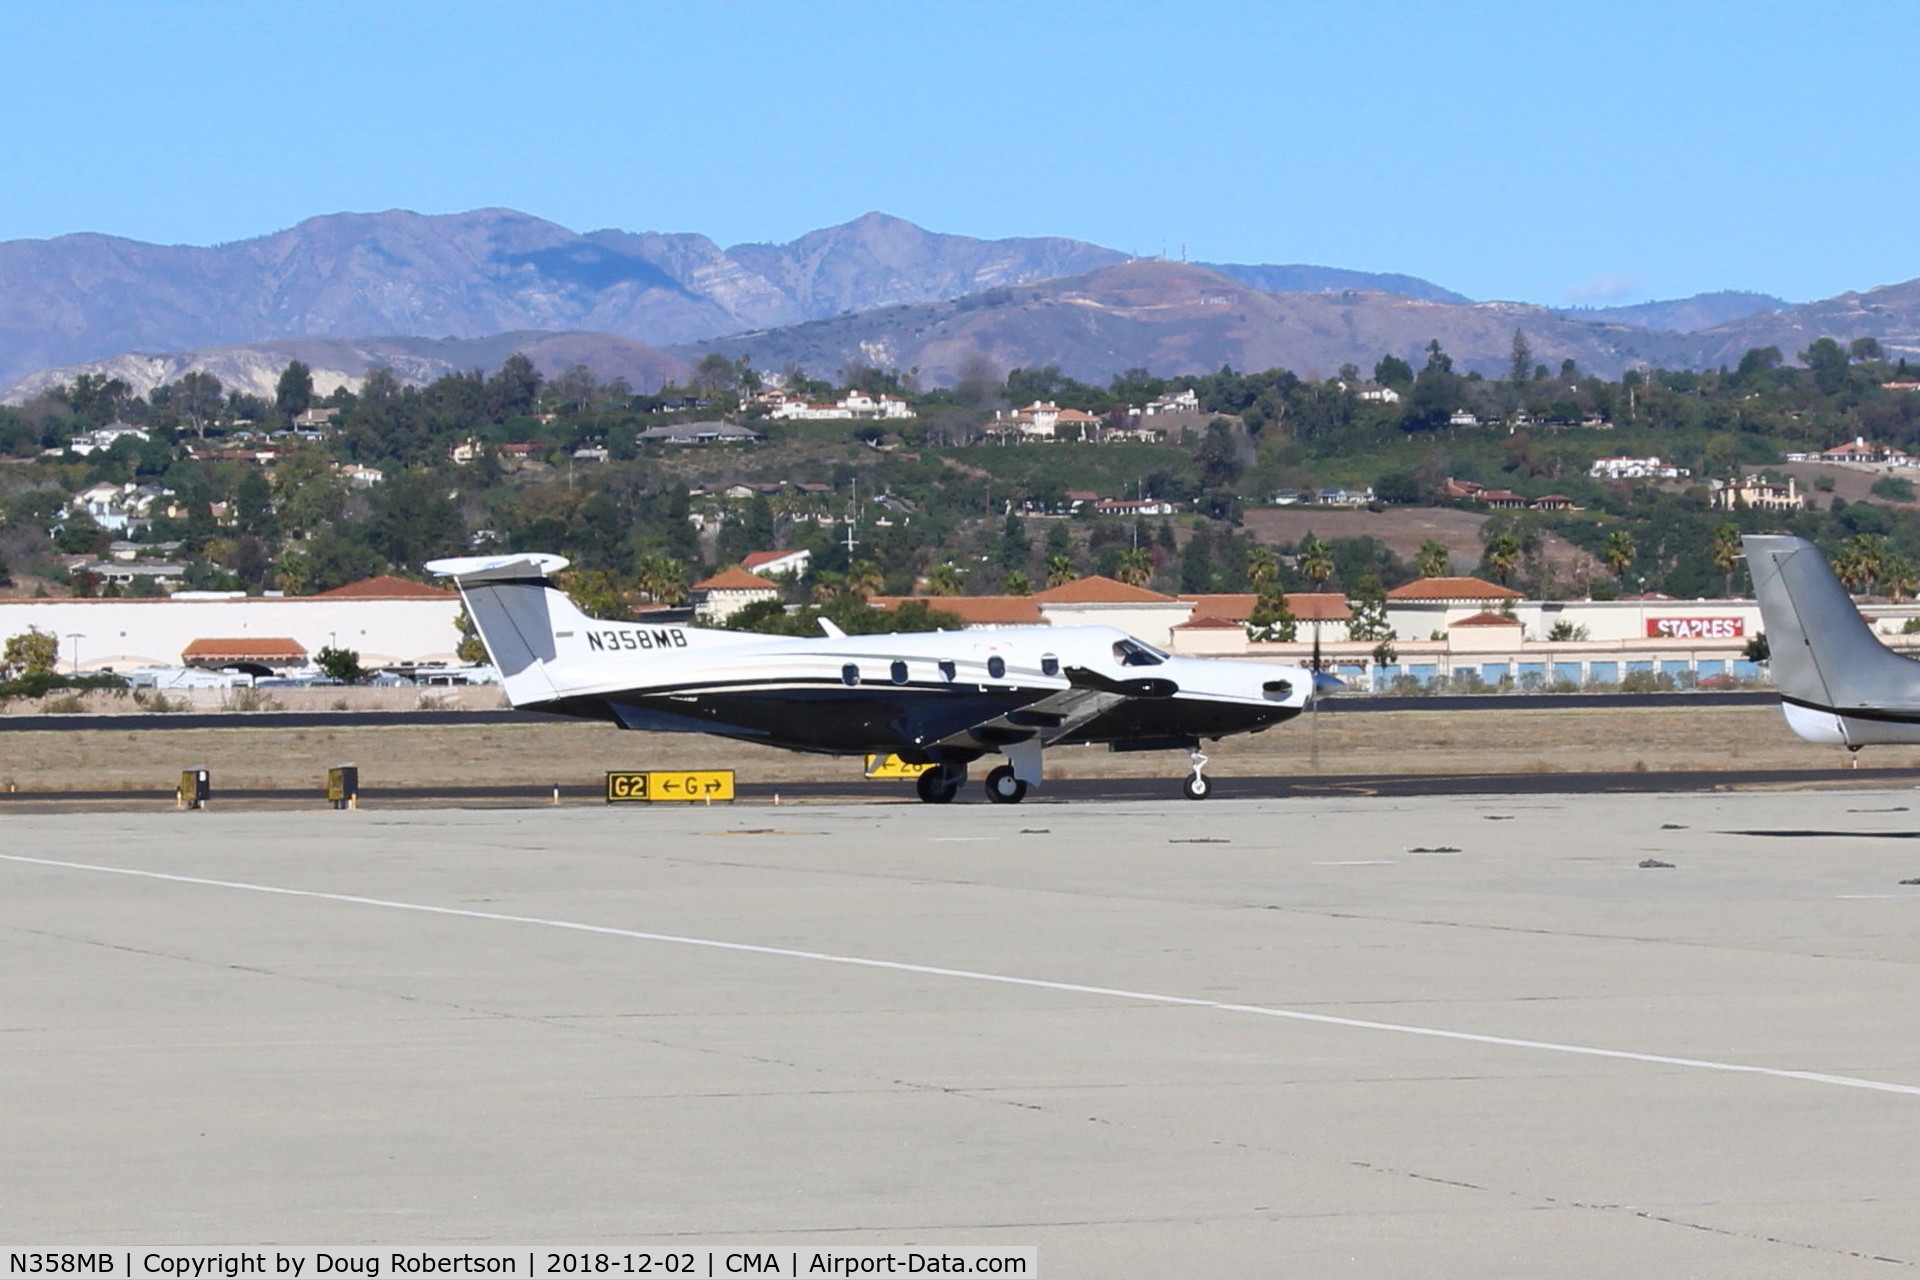 N358MB, 2011 Pilatus PC-12/47E C/N 1296, 2011 PILATUS PC-12/47E, one P&W(C)PT6A-67P Turboprop, 1,200 sHp for takeoff & climb, 1,000 sHp for cruise, taxi to Transient ramp tie-down after landing Rwy 26